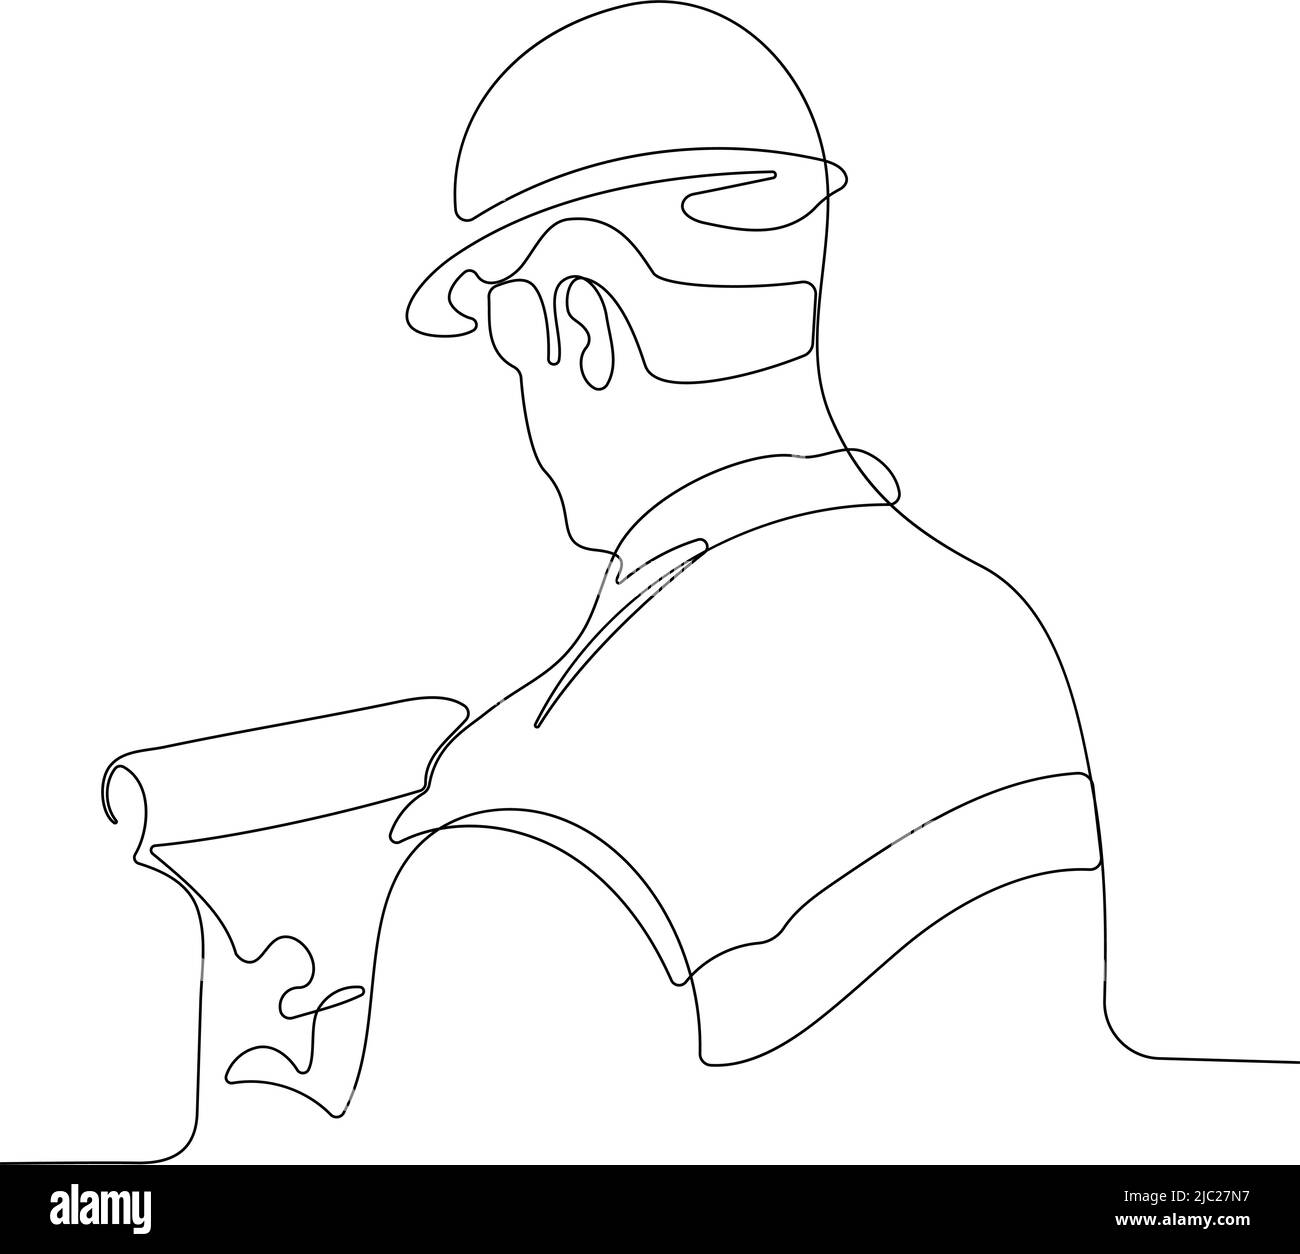 Continuous One Line Drawing Ofengineer Wearing Uniform And Safety Helmet Stock Vector Image